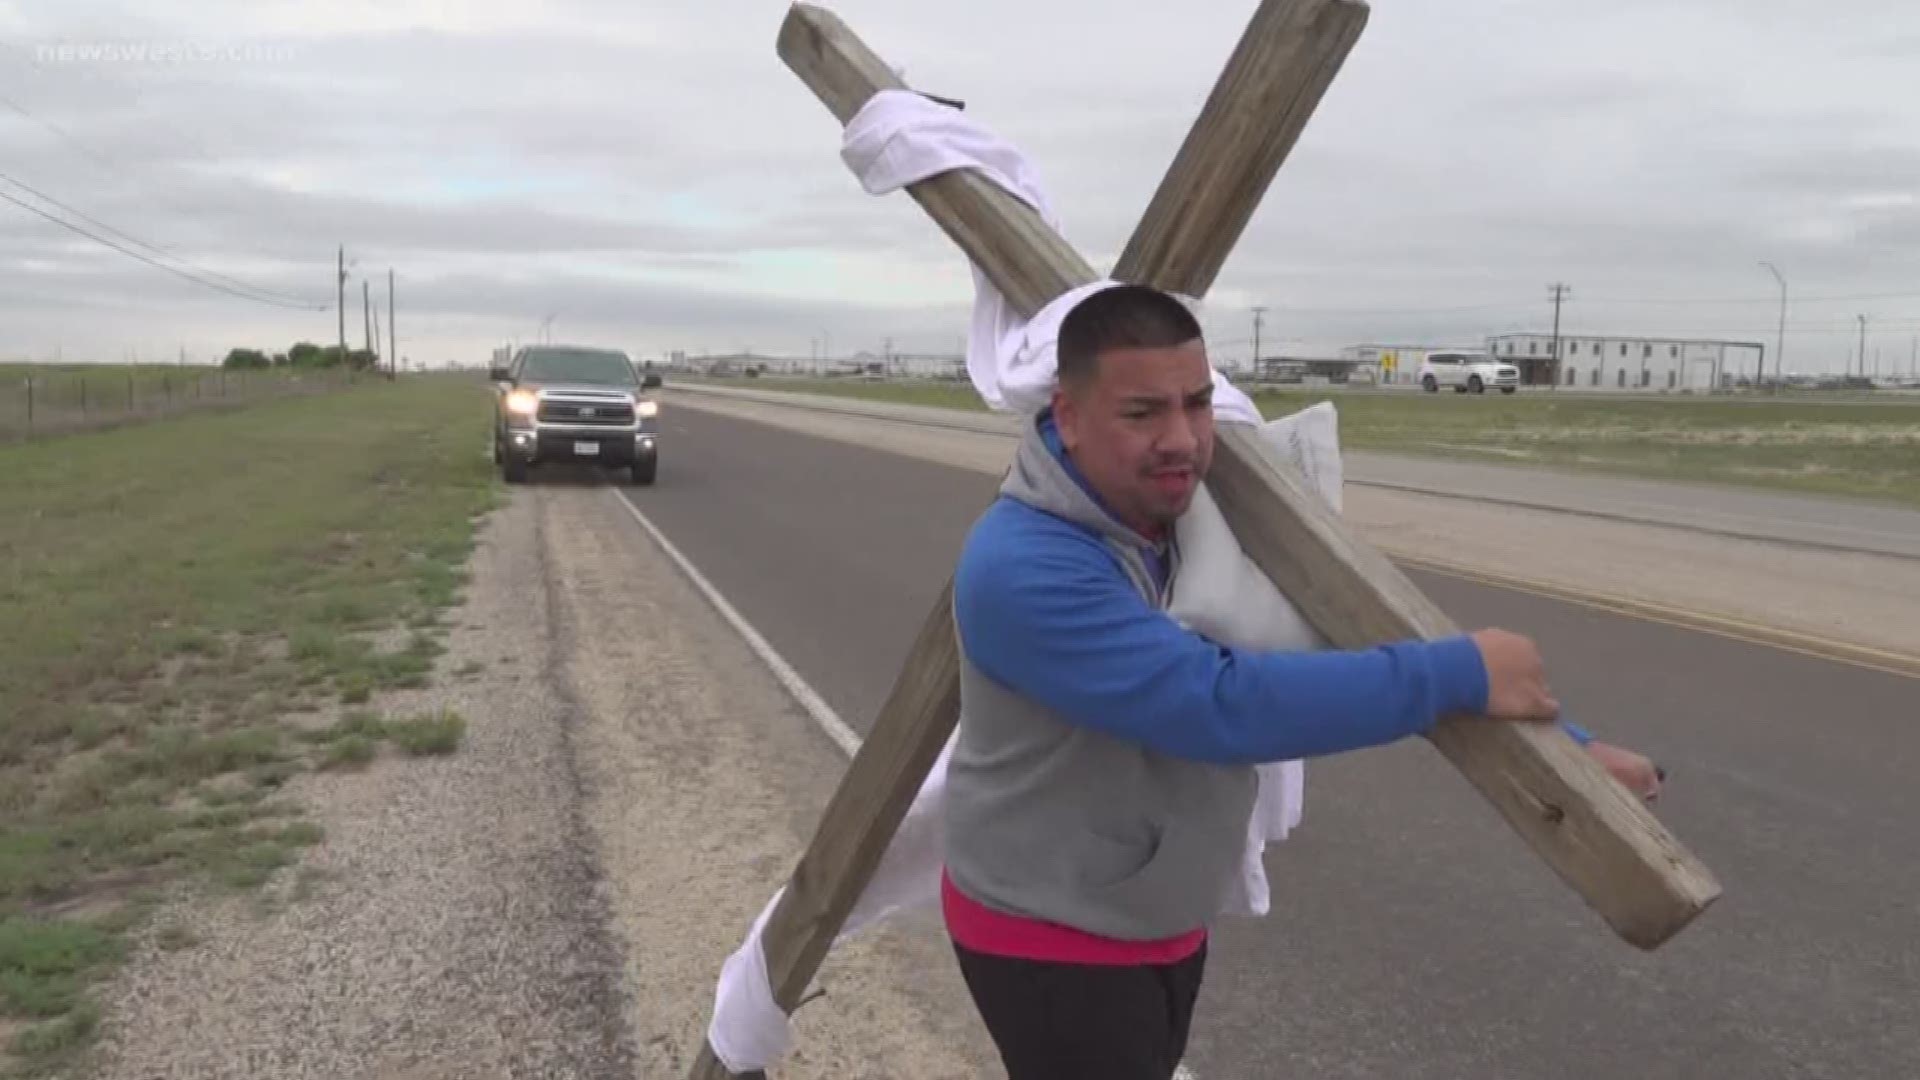 The man walked from Odessa to Midland with the cross.